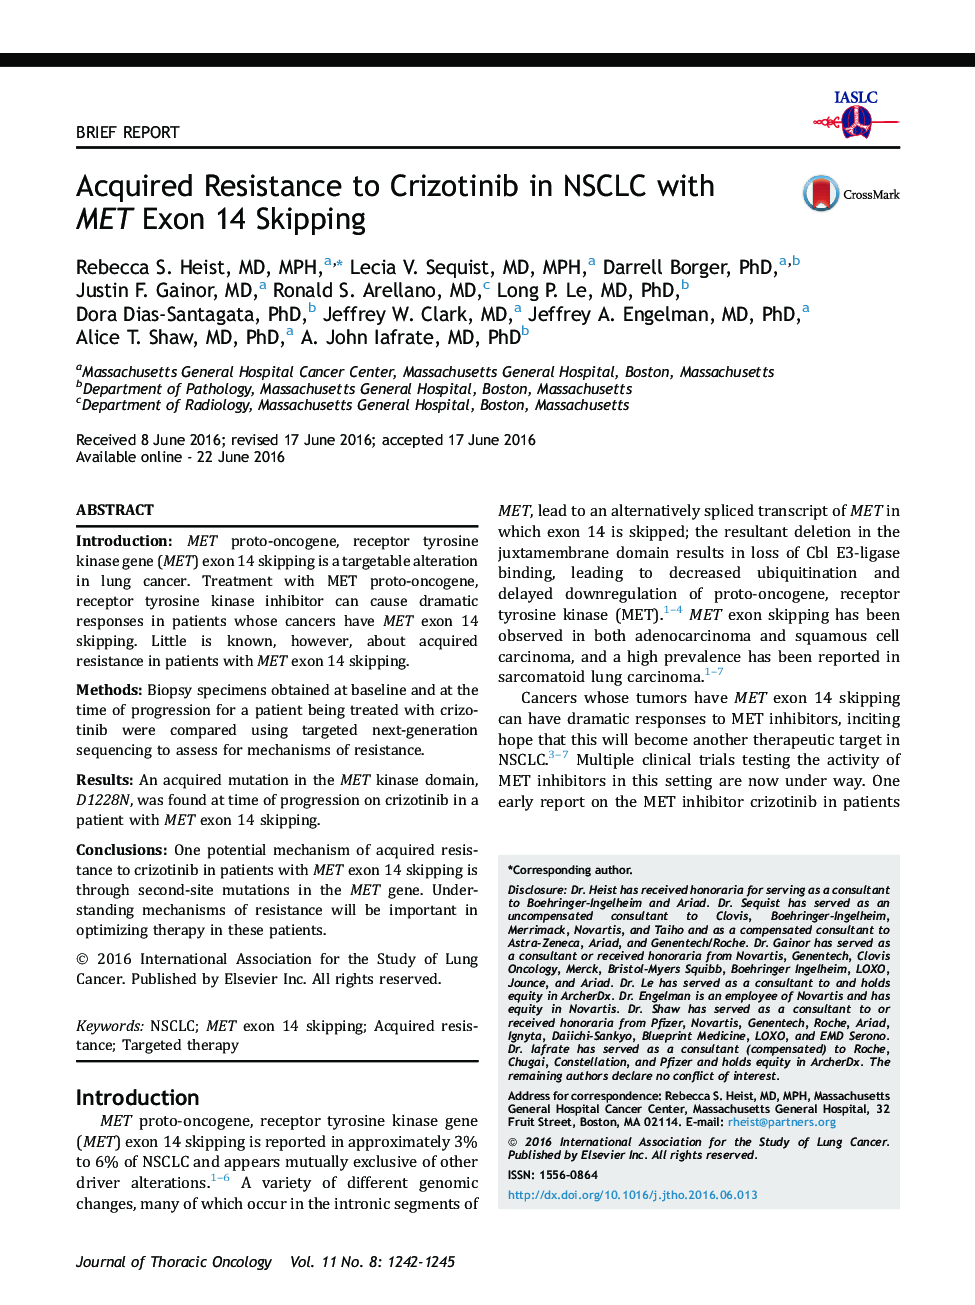 Acquired Resistance to Crizotinib in NSCLC with METÂ Exon 14 Skipping